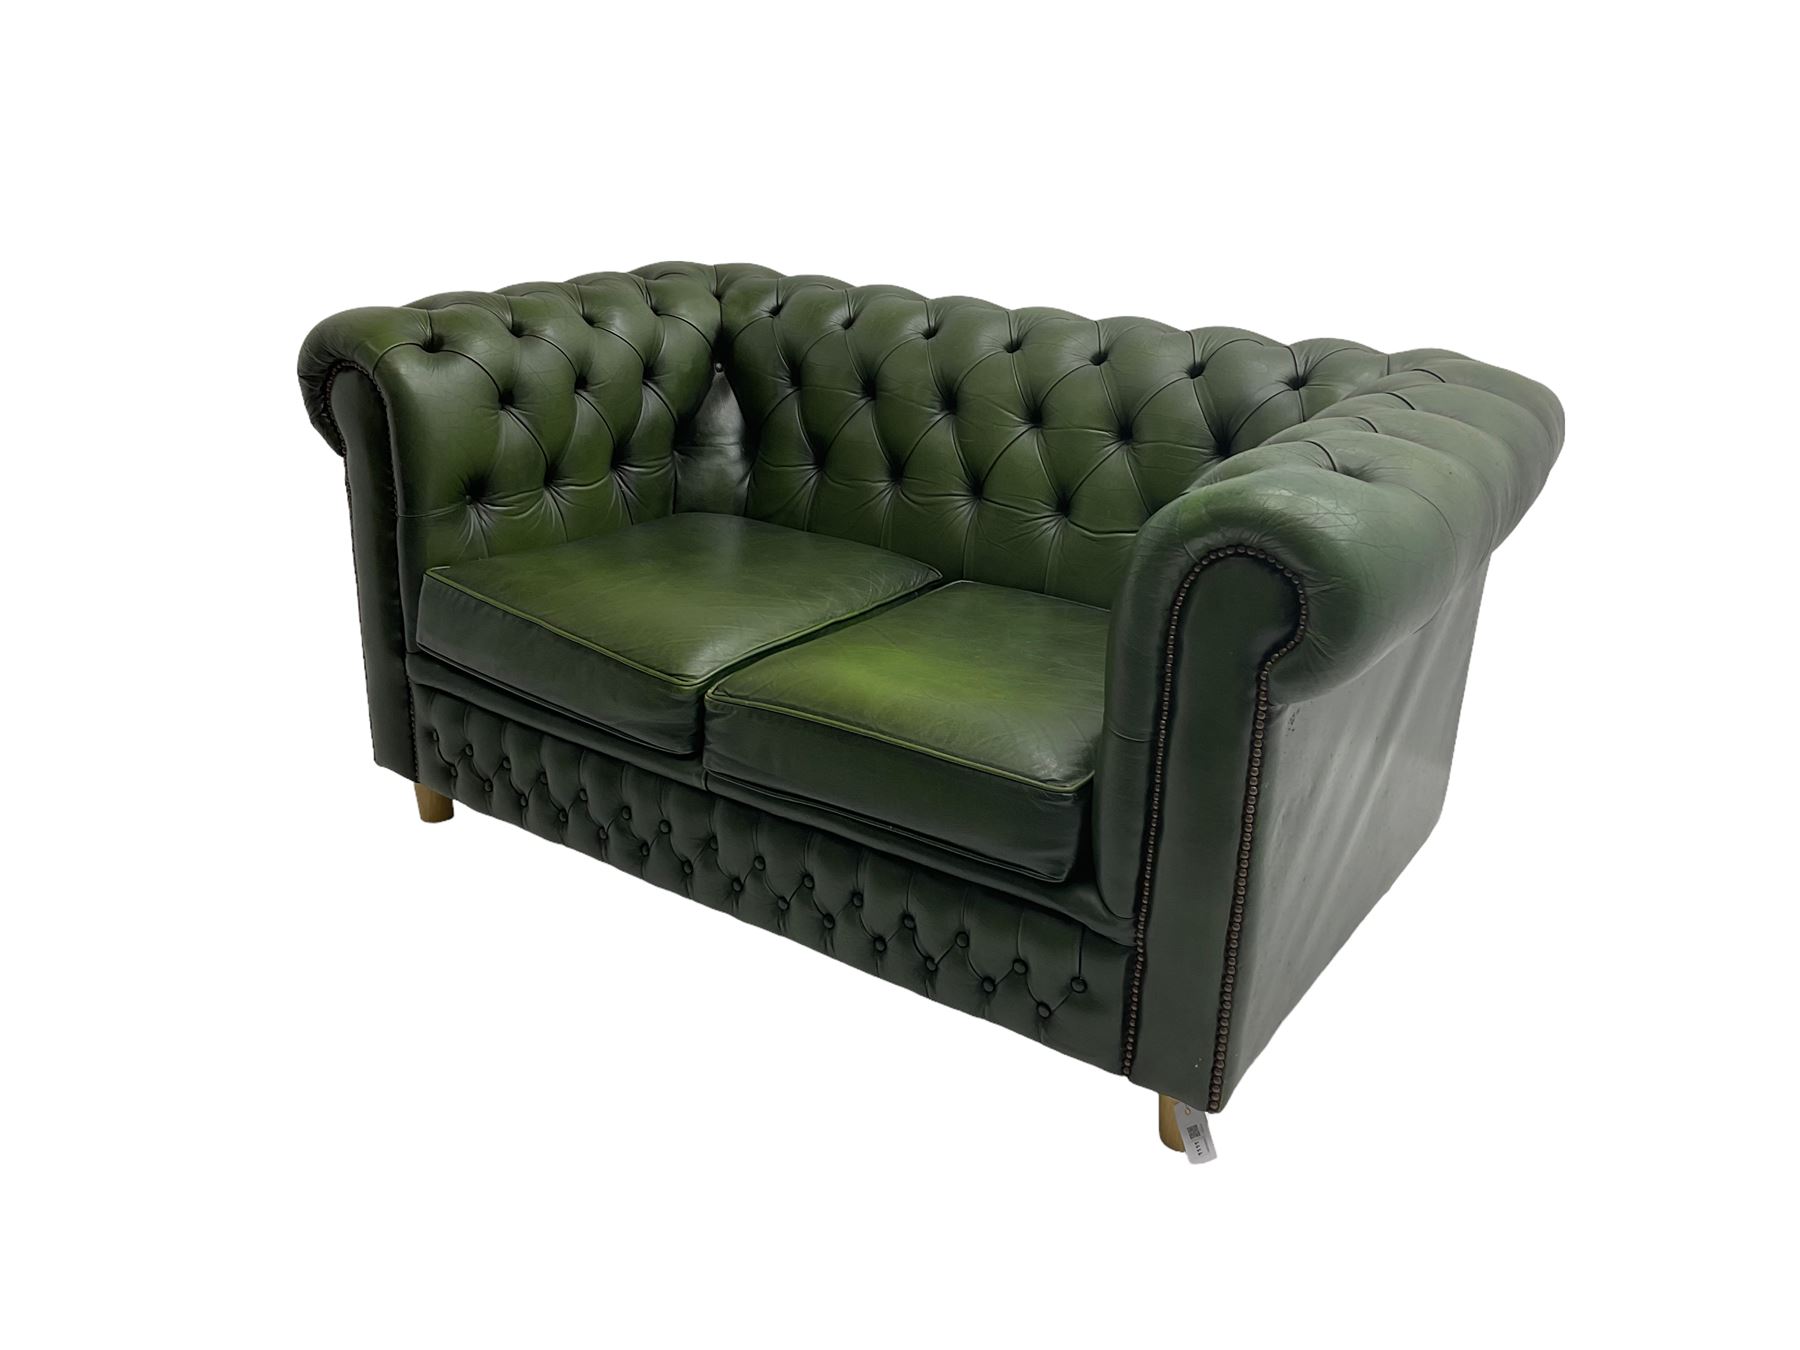 Chesterfield style two seat sofa upholstered in buttoned green leather with stud work - Image 2 of 5